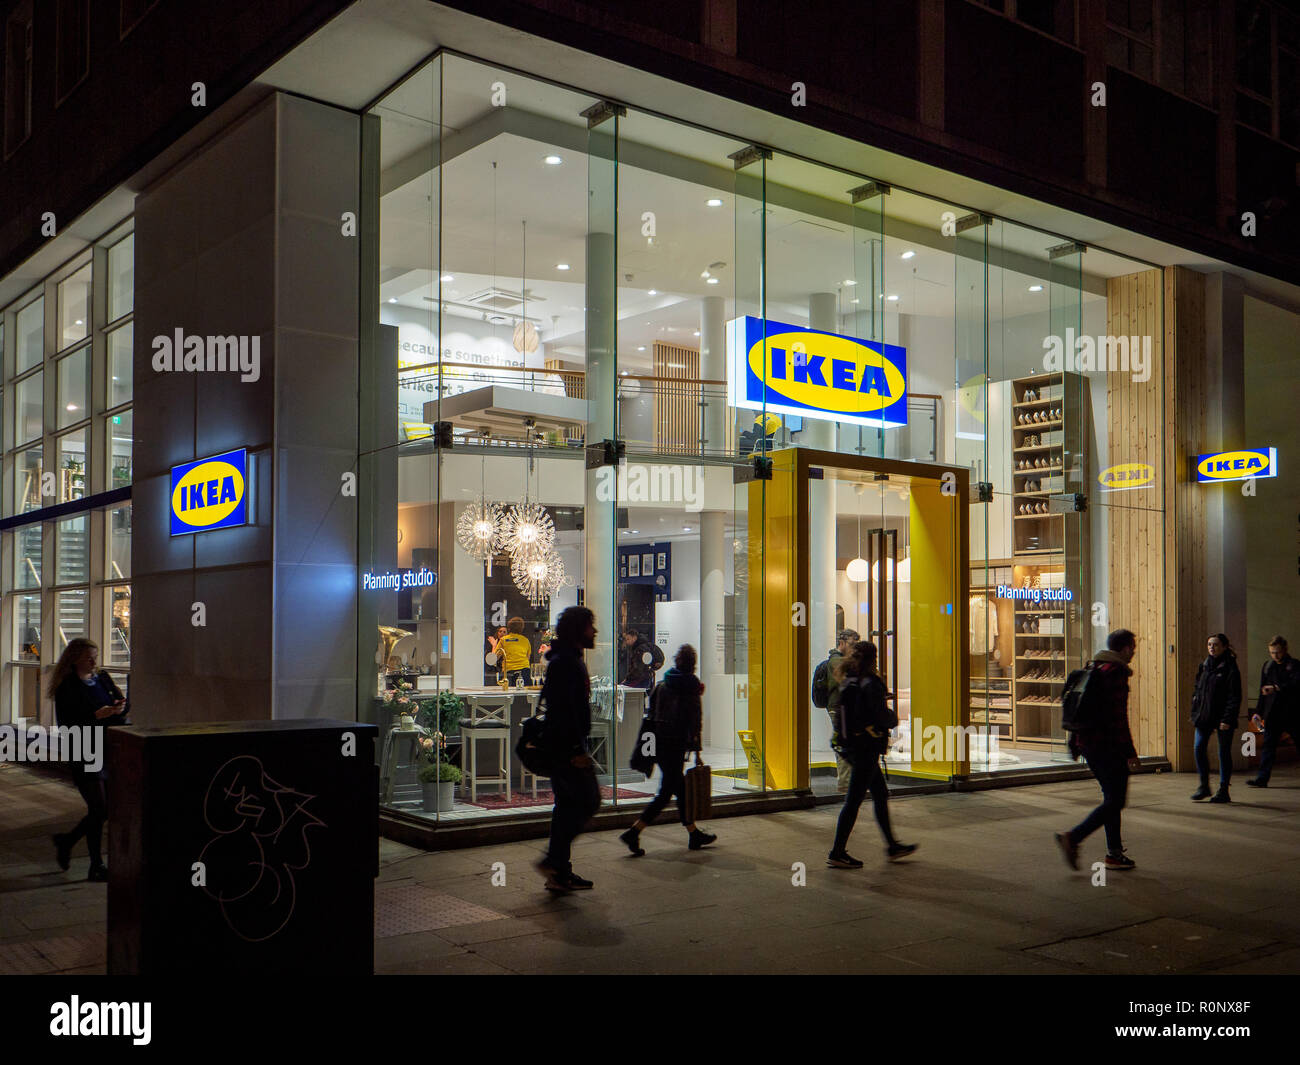 Ikea Mini Store - Ikea Central London Ikea Tottenham Court Road - The IKEA design and planning store in central London UK Stock Photo